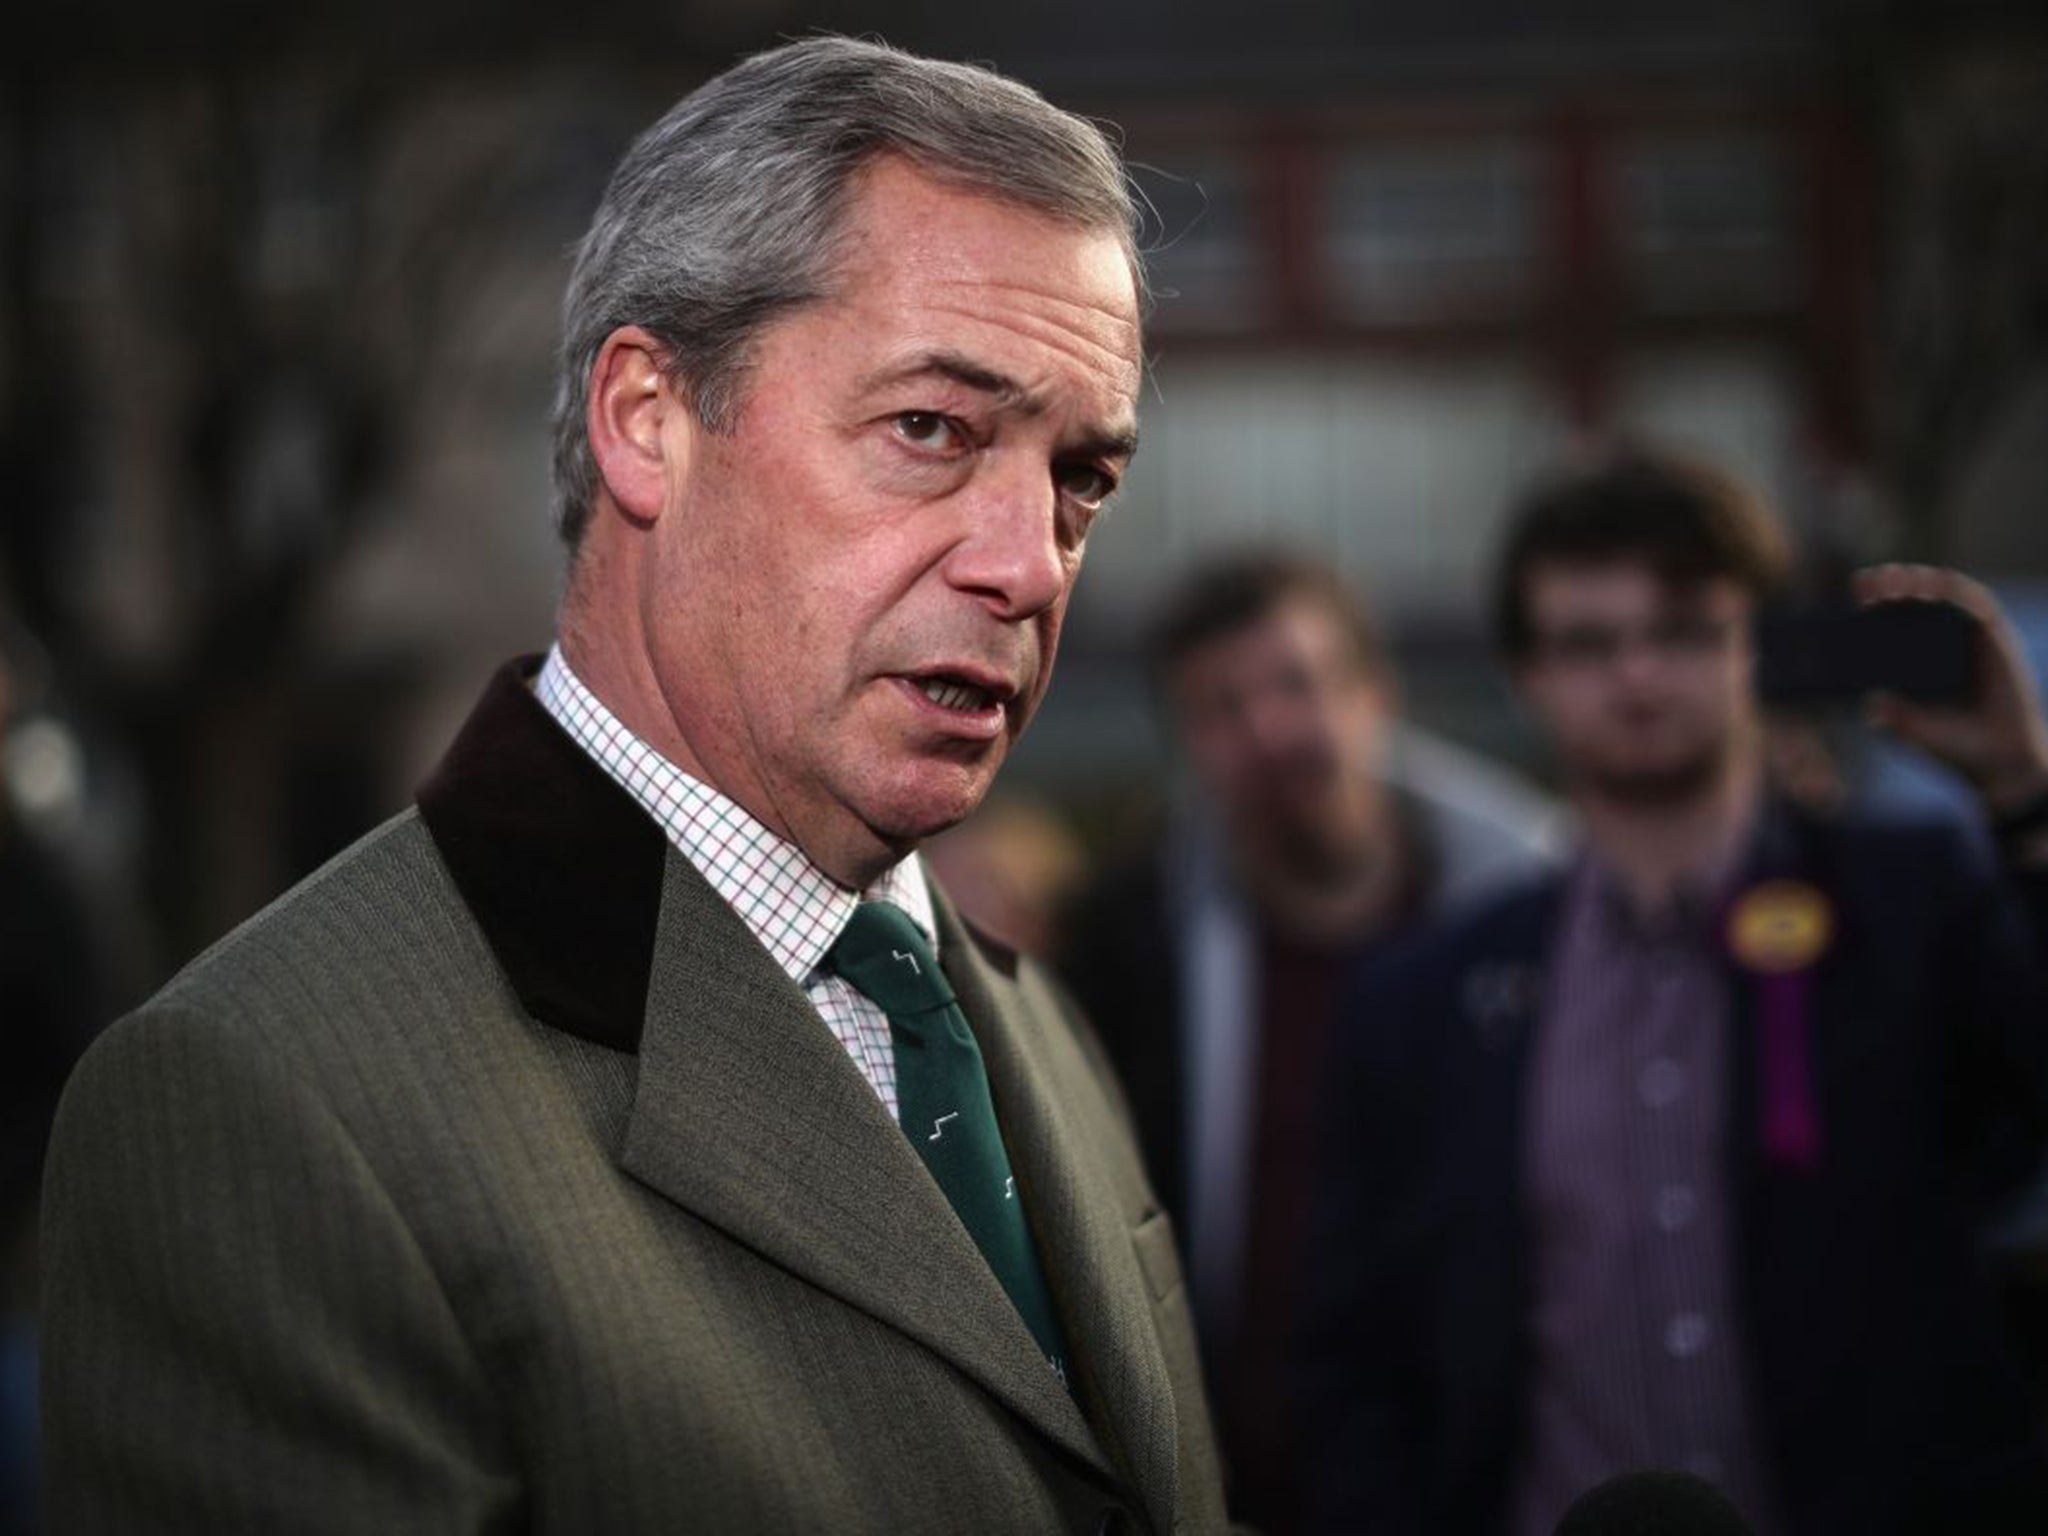 Farage described British politics as ‘very small-minded’ and ‘petty’